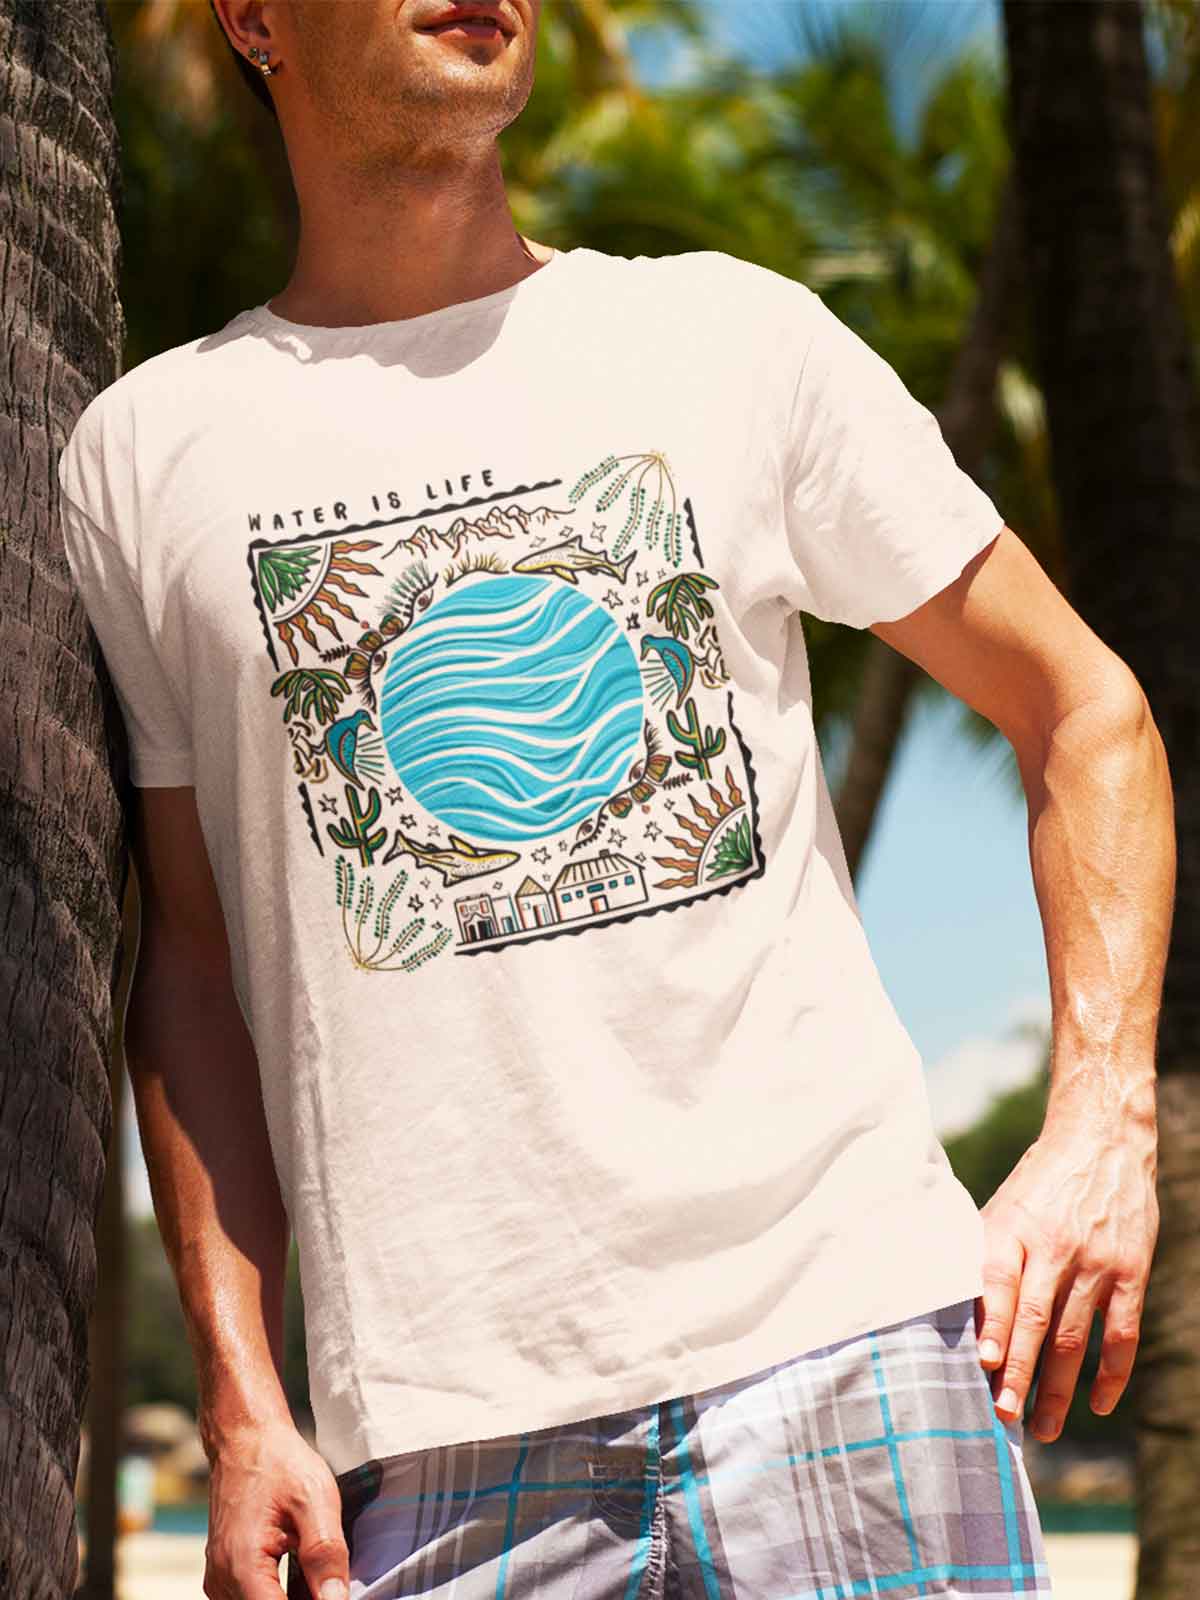 Water-is-life-printed-t-shirt-for-men by Ghumakkad